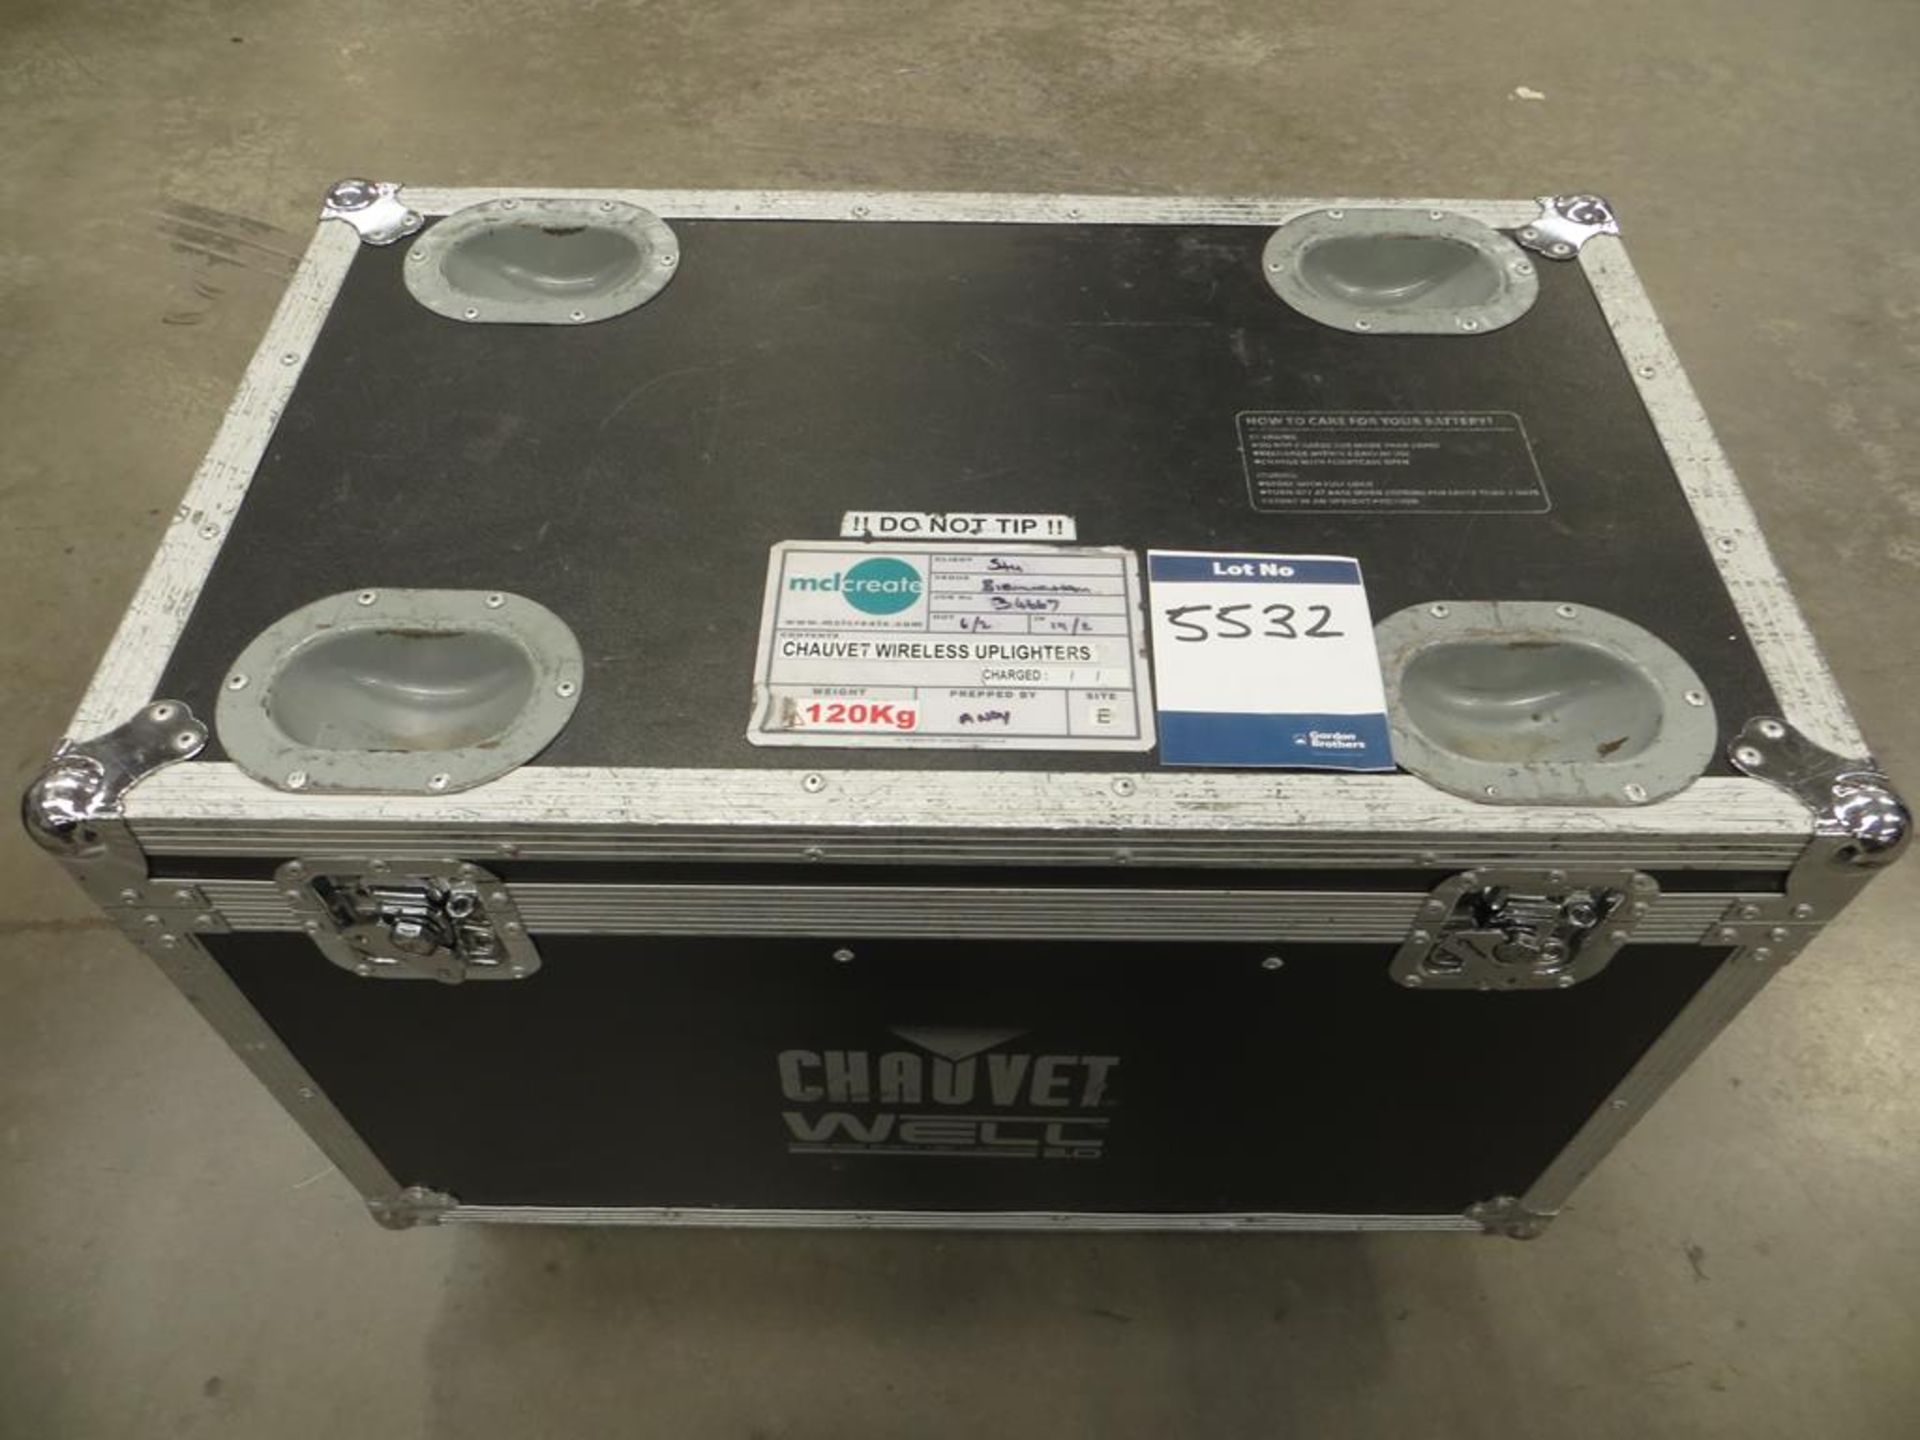 Chauvet Well, 2.0 battery powered wireless uplight - Image 5 of 5